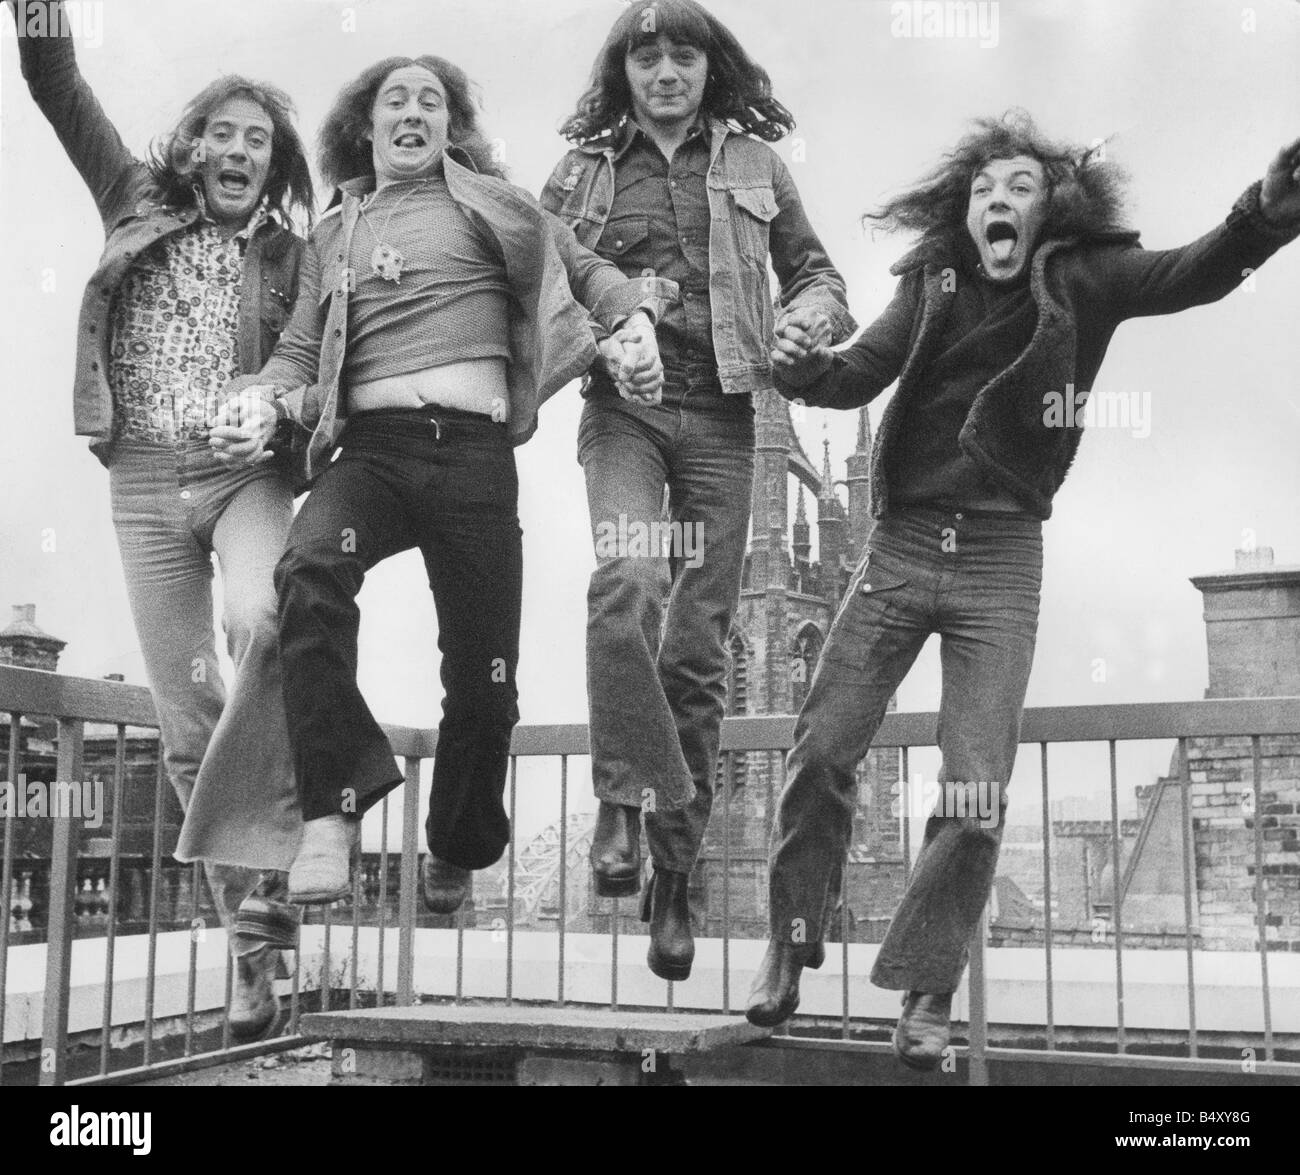 Geordie the former band of Brian Johnson lead singer of the rock group AC DC Left to right Vic Malcolm Tom Hill Brian Gibson and Brian Johnson 28 09 72 Stock Photo